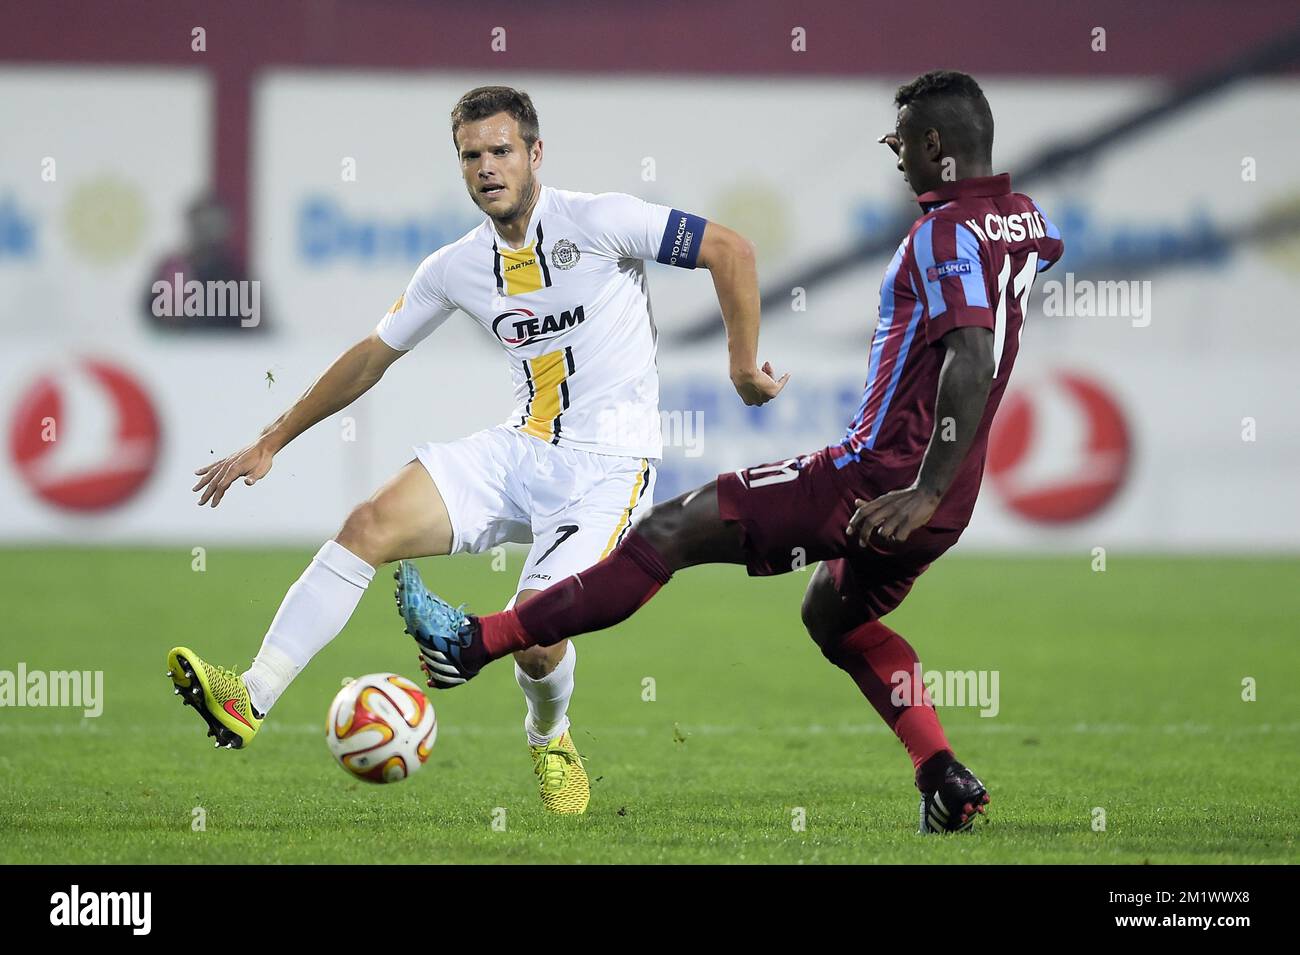 20141023 - TRABZON, TURKEY: Lokeren's Killian Overmeire and Trabzonspor's Kevin Constant fight for the ball during a game between Turkish club Trabzonspor AS and Belgian soccer team KSC Lokeren OVL in the Huseyin Avni Aker Stadium in Trabzon, Thursday 23 October 2014. It is the third day of the group stage of the UEFA Europa League competition, in group L. BELGA PHOTO YORICK JANSENS Stock Photo